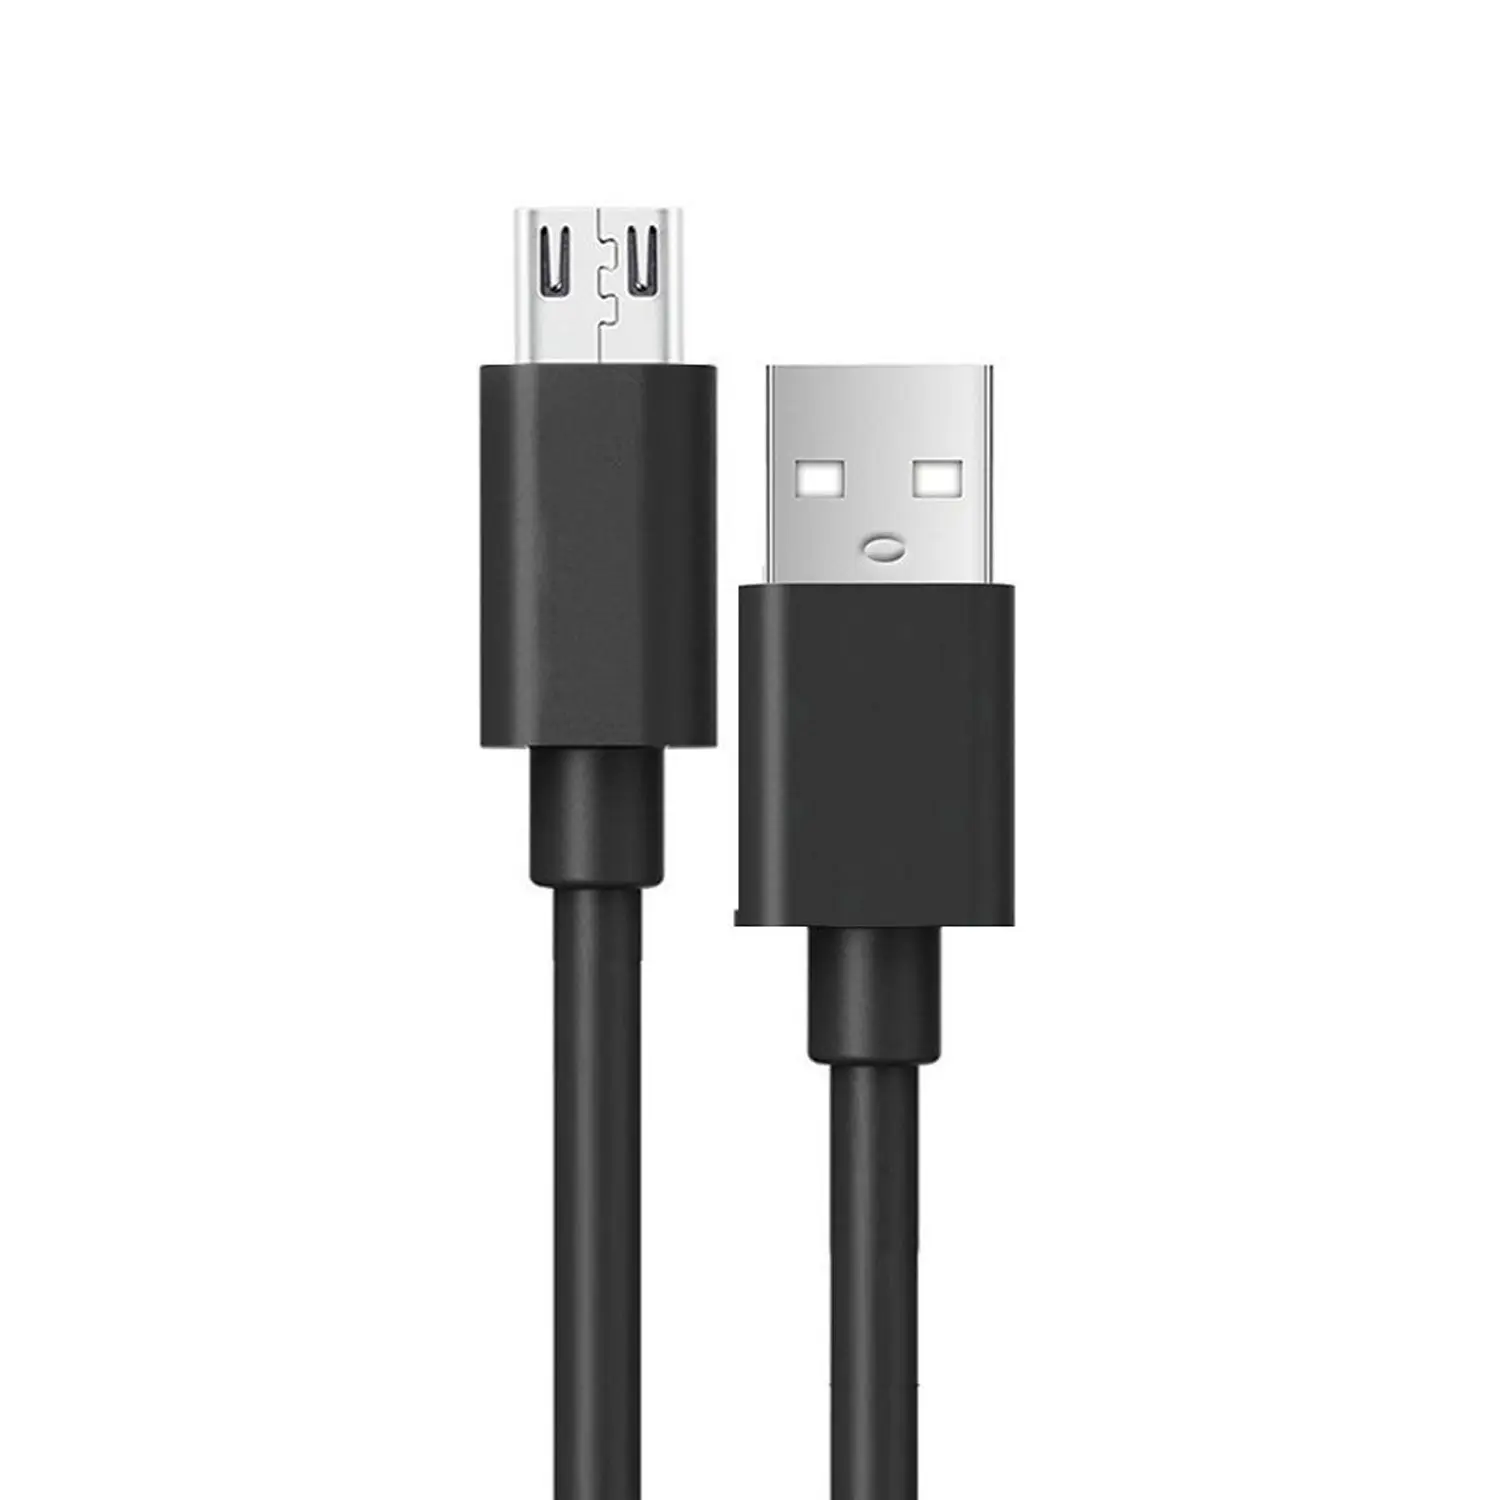 Micro to usb 1m 2m 3ft 6ft male charger quick fast data charge chargers mobile usb power cables charging cable